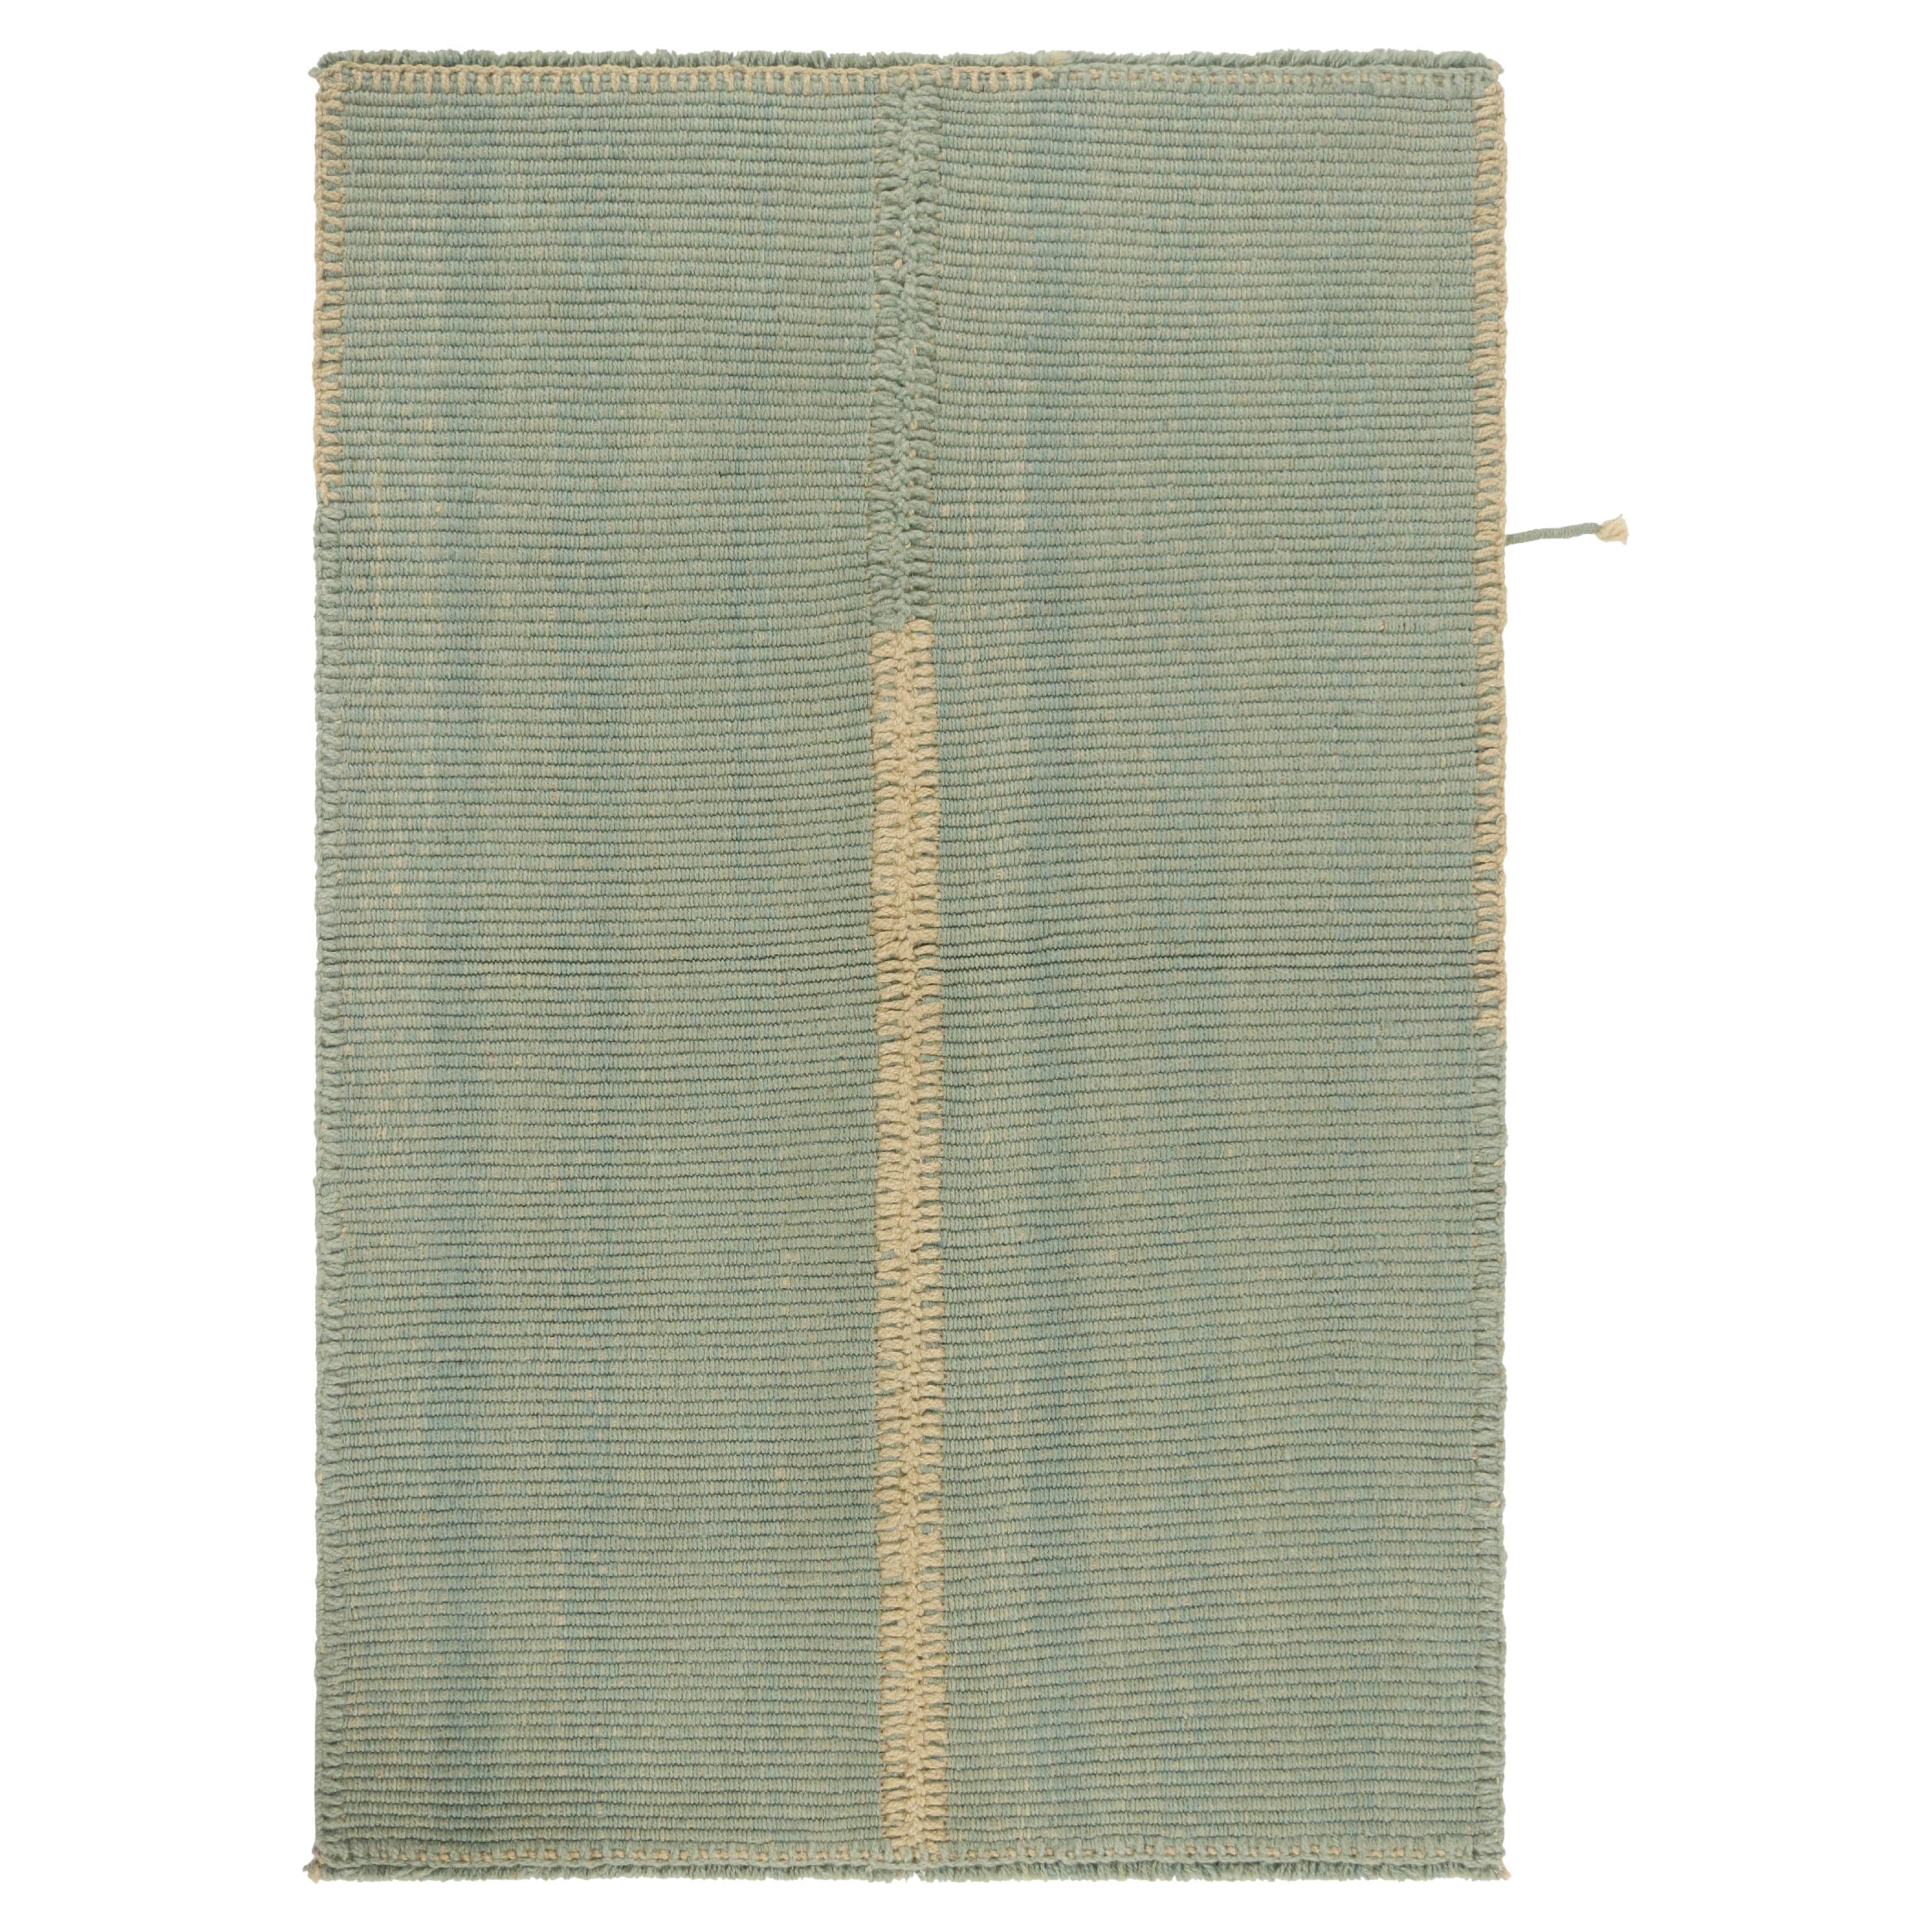 Rug & Kilim’s Contemporary Kilim in Light Blue with Off-White Accents